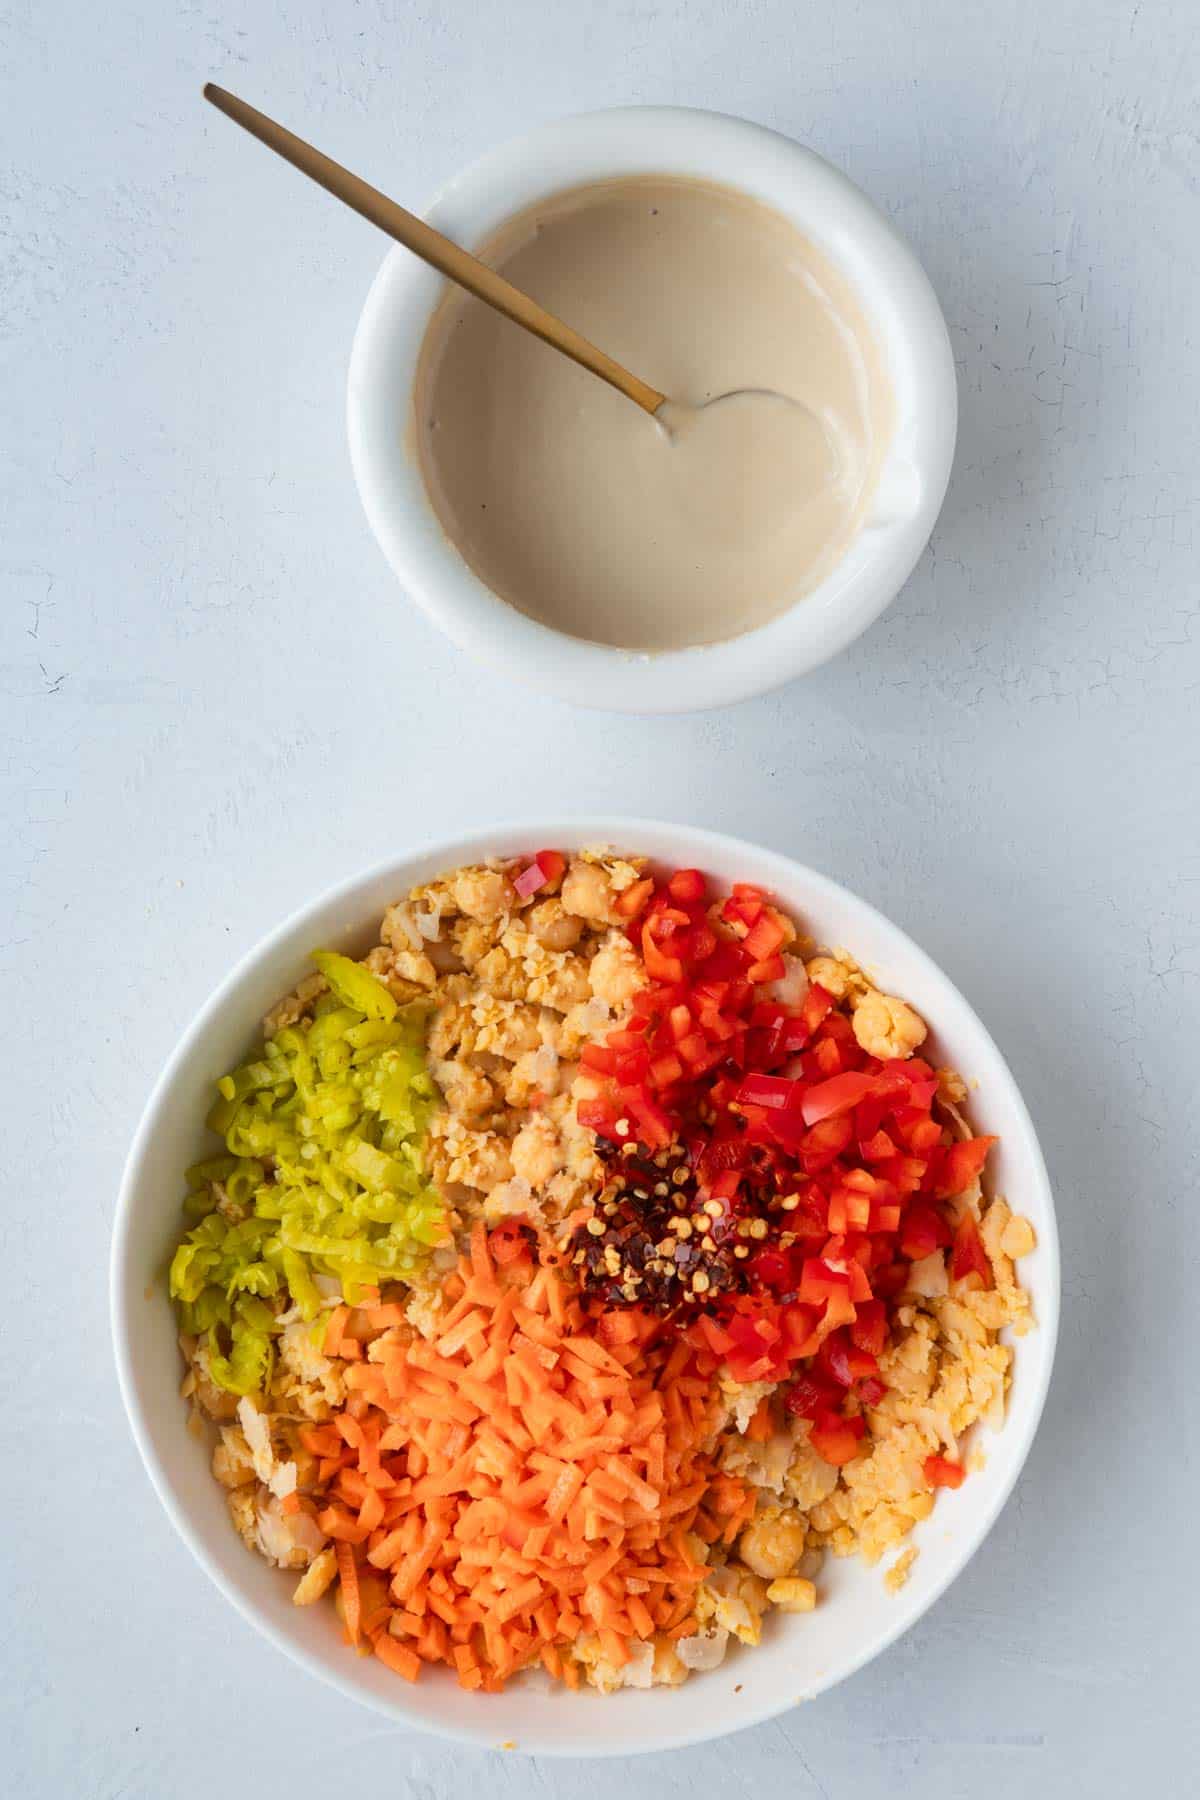 Chopped carrots, peppers, and pepperoncini, and red pepper flakes in a white bowl next to a smaller bowl with creamy tahini dressing.